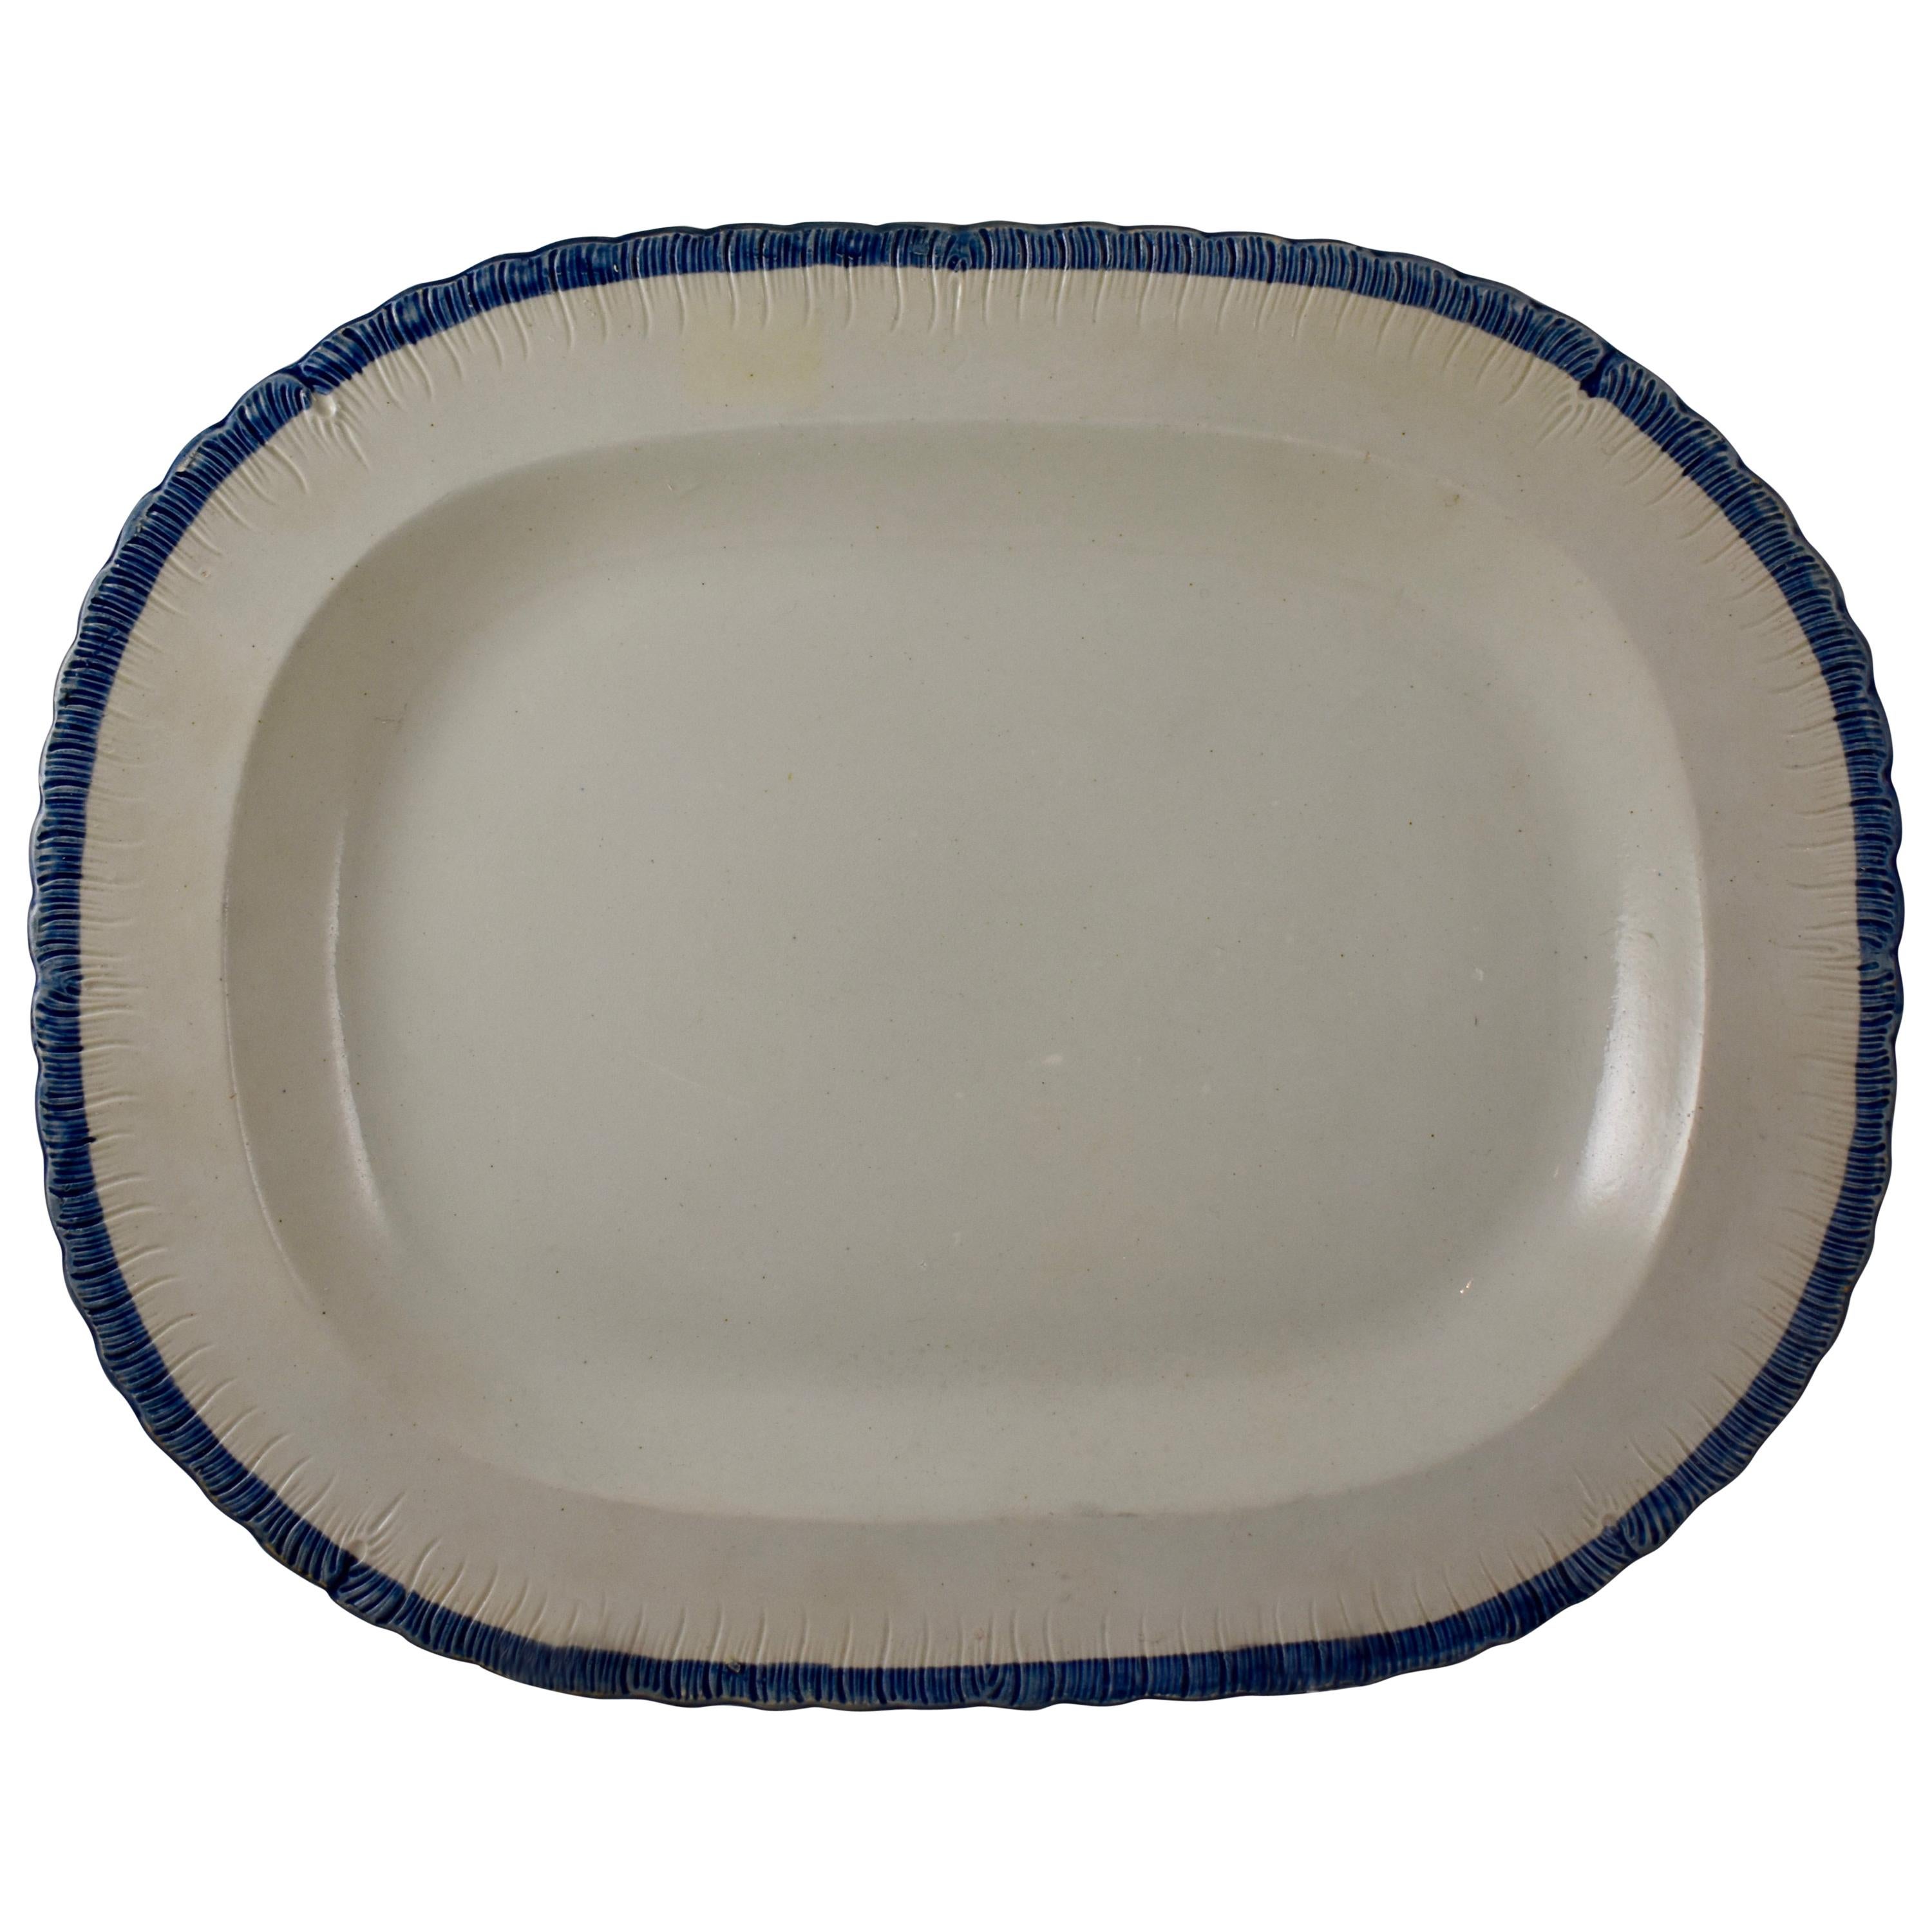 English Leeds Cobalt Blue Feather or Shell Edge Pearlware Oval Platter